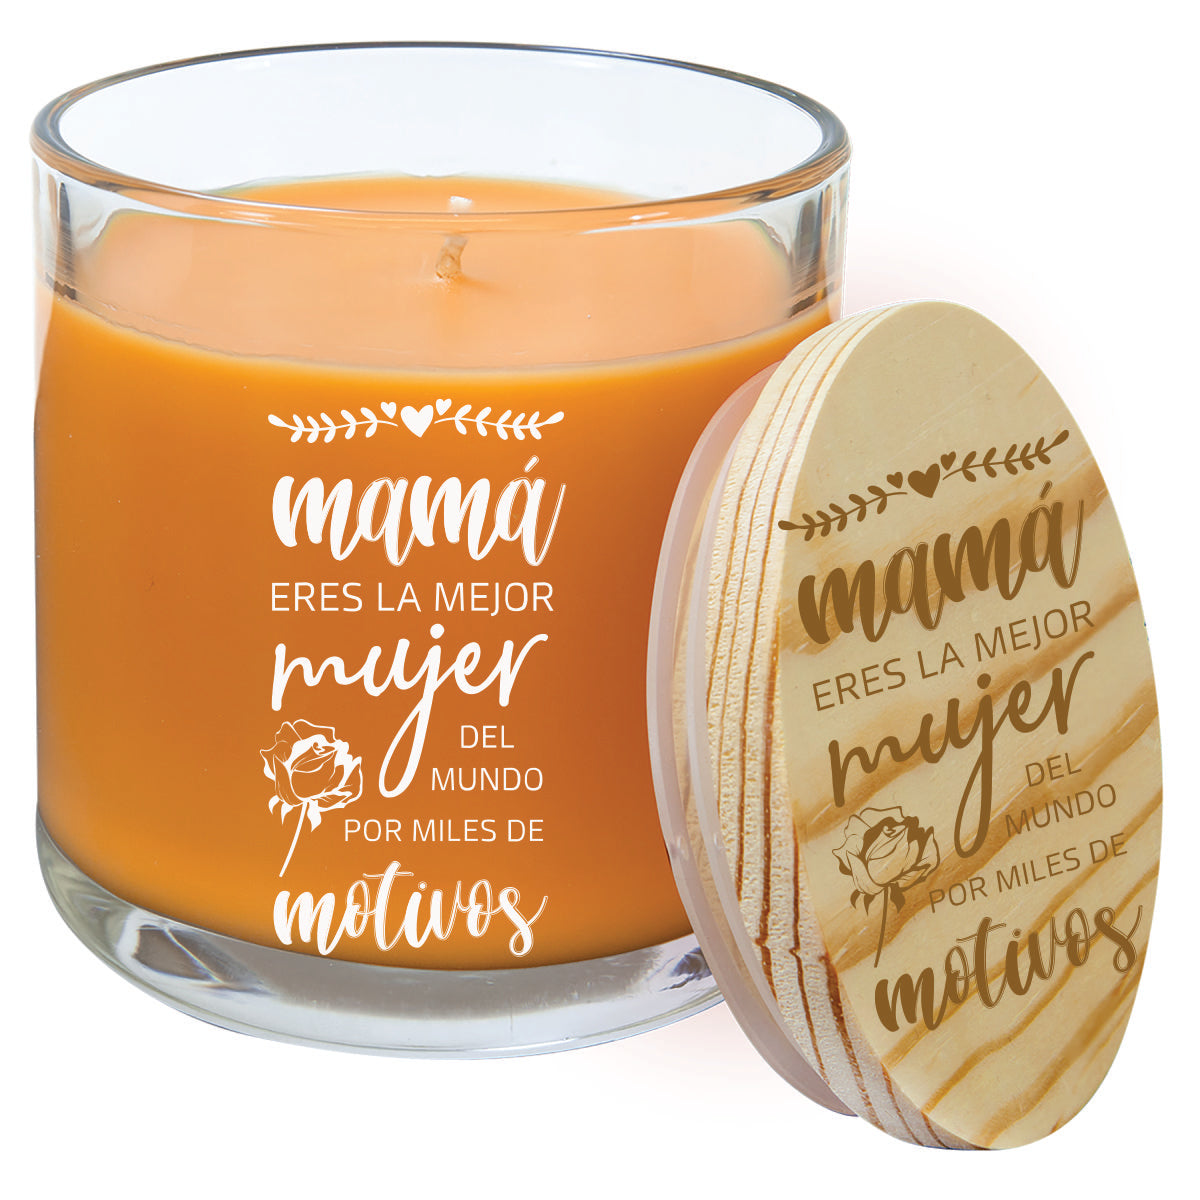 14 oz. Bright Citrus Candle in a Glass Holder with Wood Lid